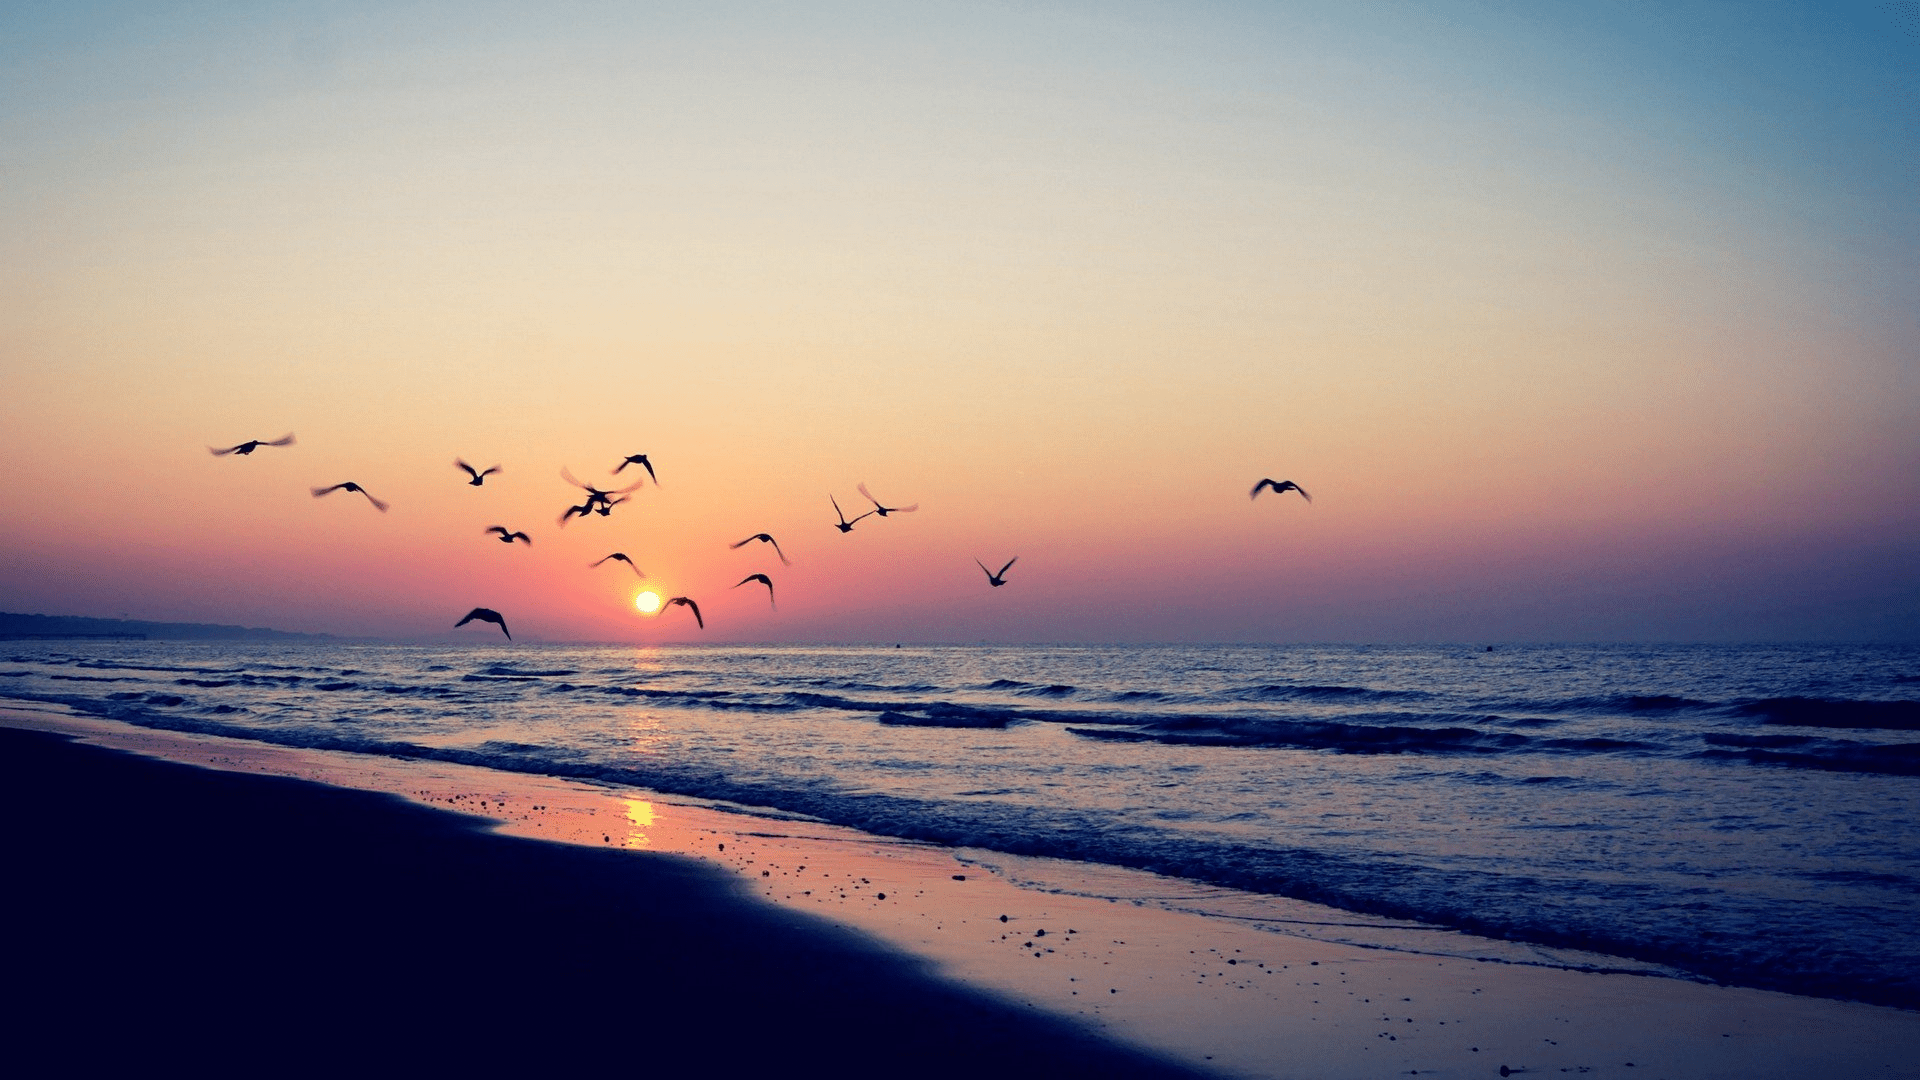 Sunset Hd Aesthetic Wallpapers Top Free Sunset Hd Aesthetic